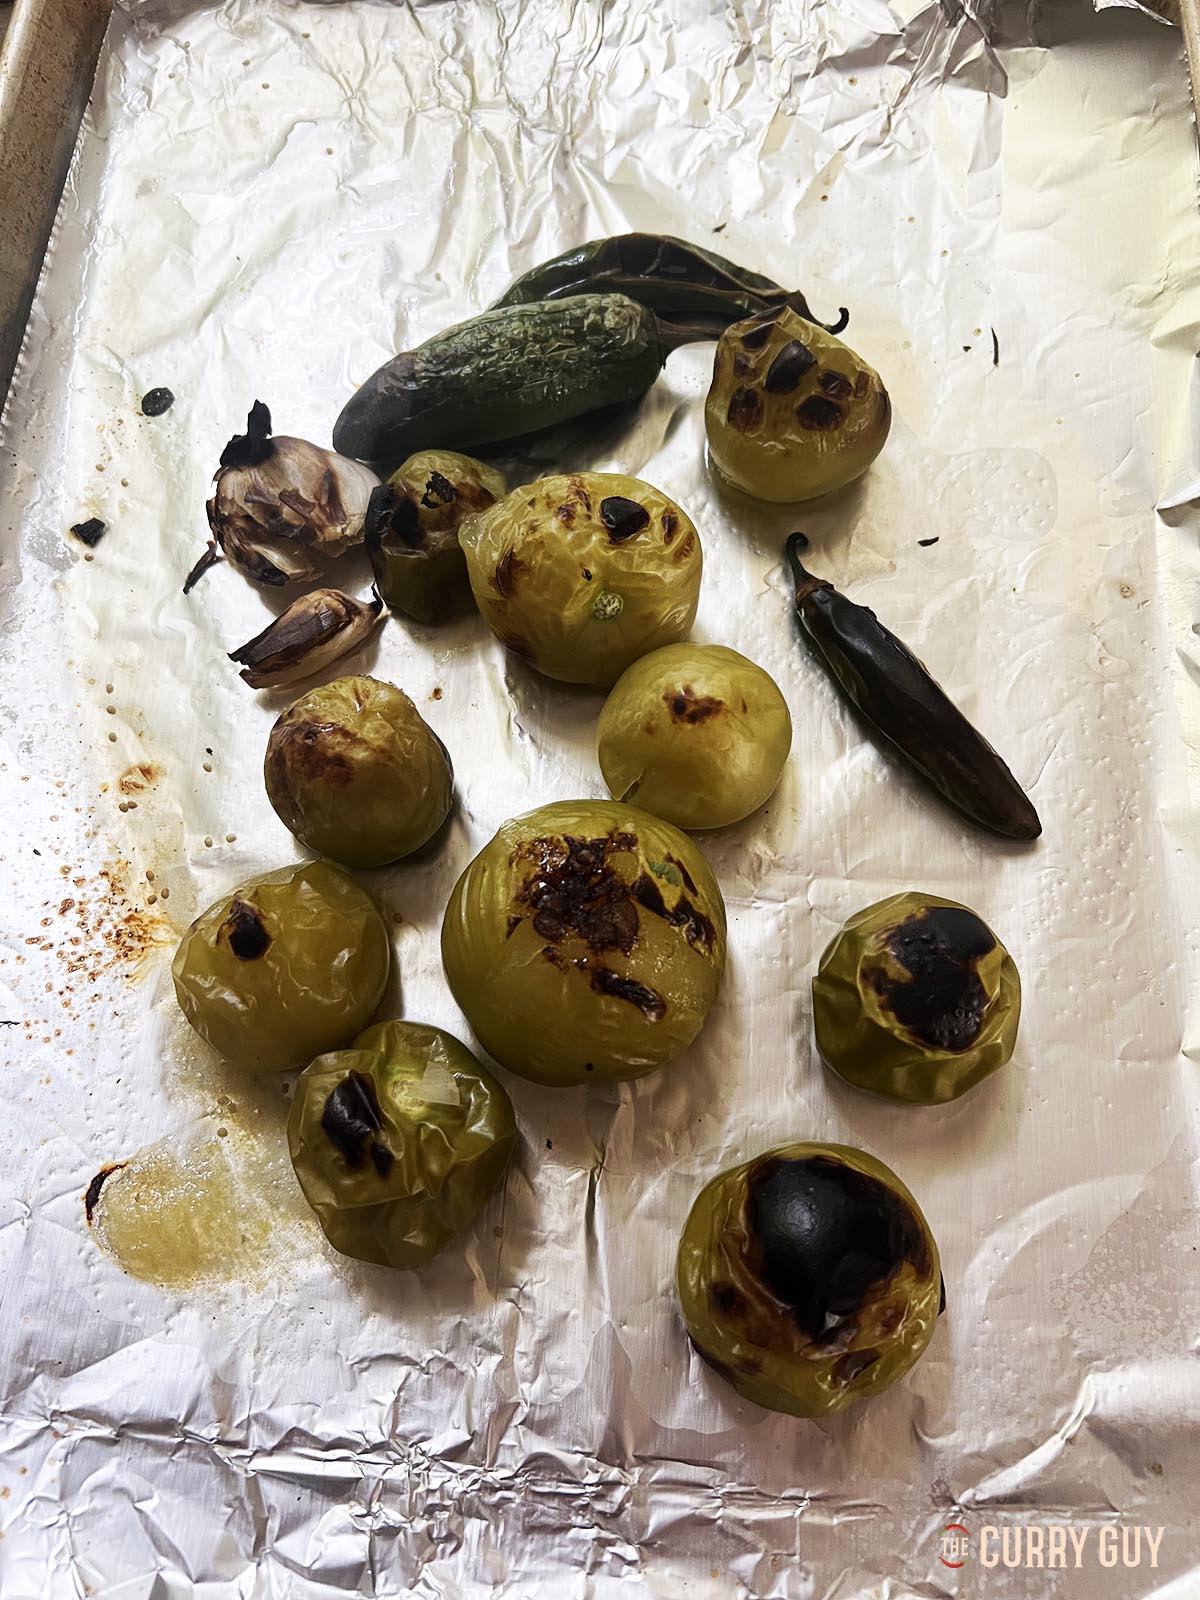 The roasted tomatillos, chilies and garlic on a baking tray.